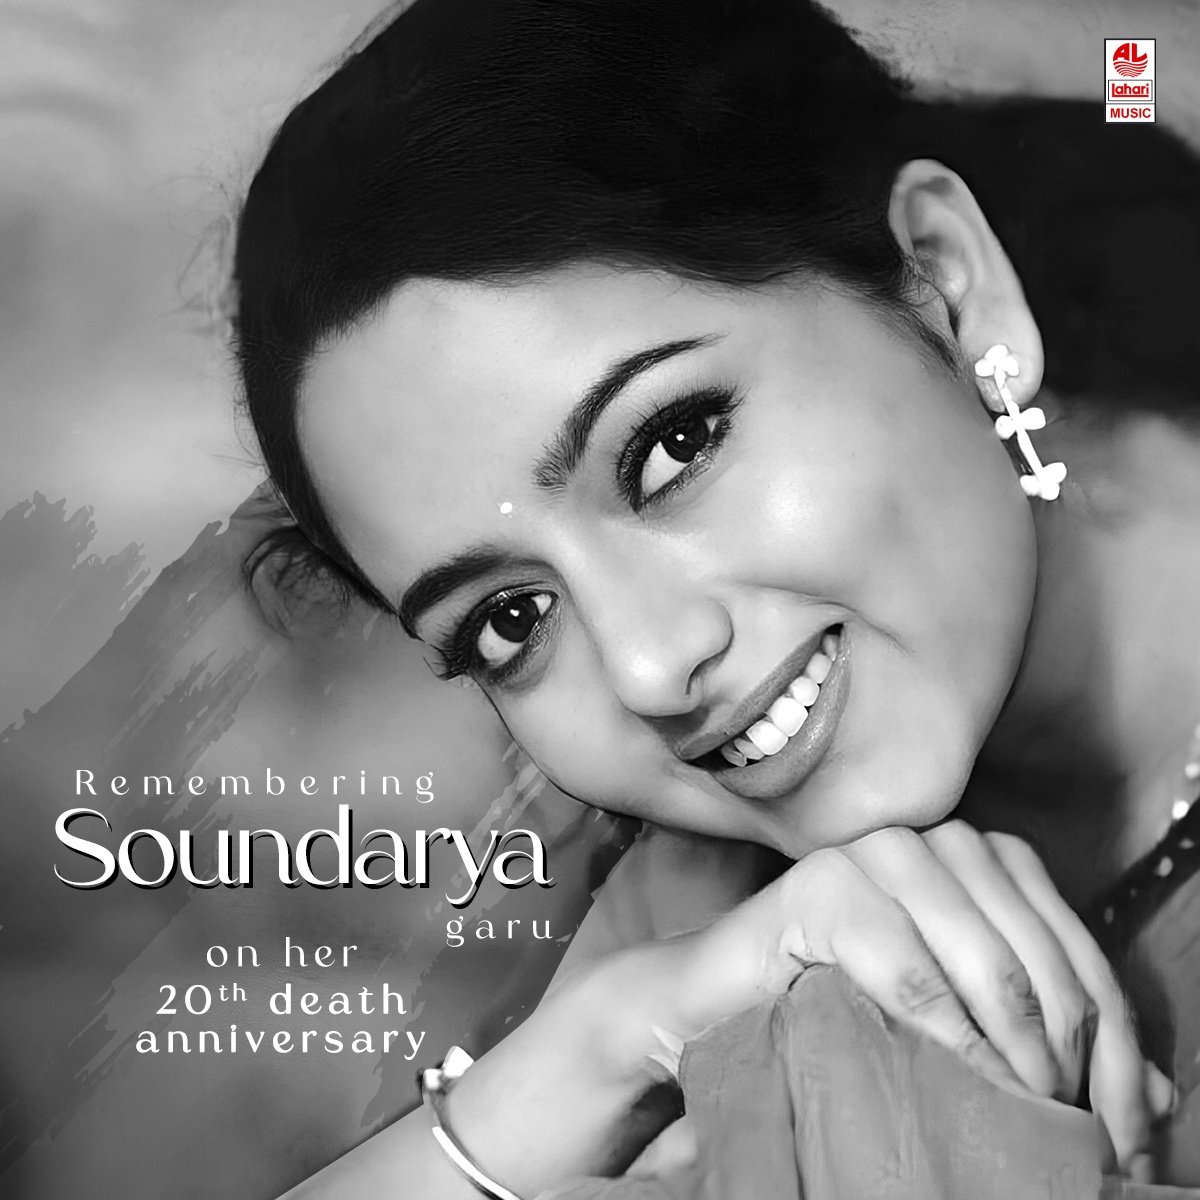 Remembering actress Soundarya on her death anniversary. In all these years, no one has matched her elegance or her ability to captivate audiences on screen.

#Soundarya #LahariMusic